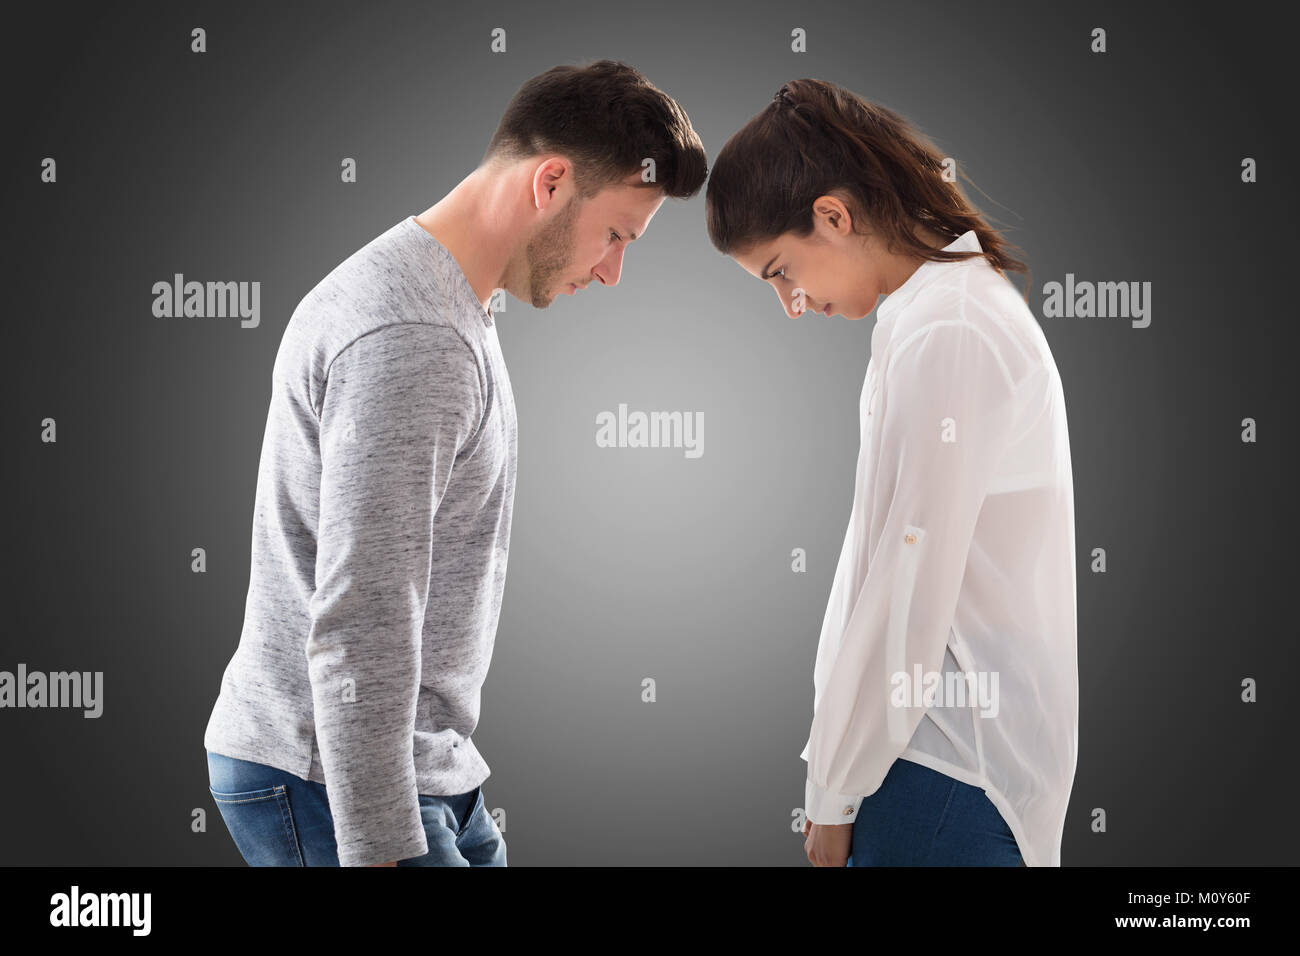 Young Sad Couple Standing Face To Face On Gray Background Stock Photo